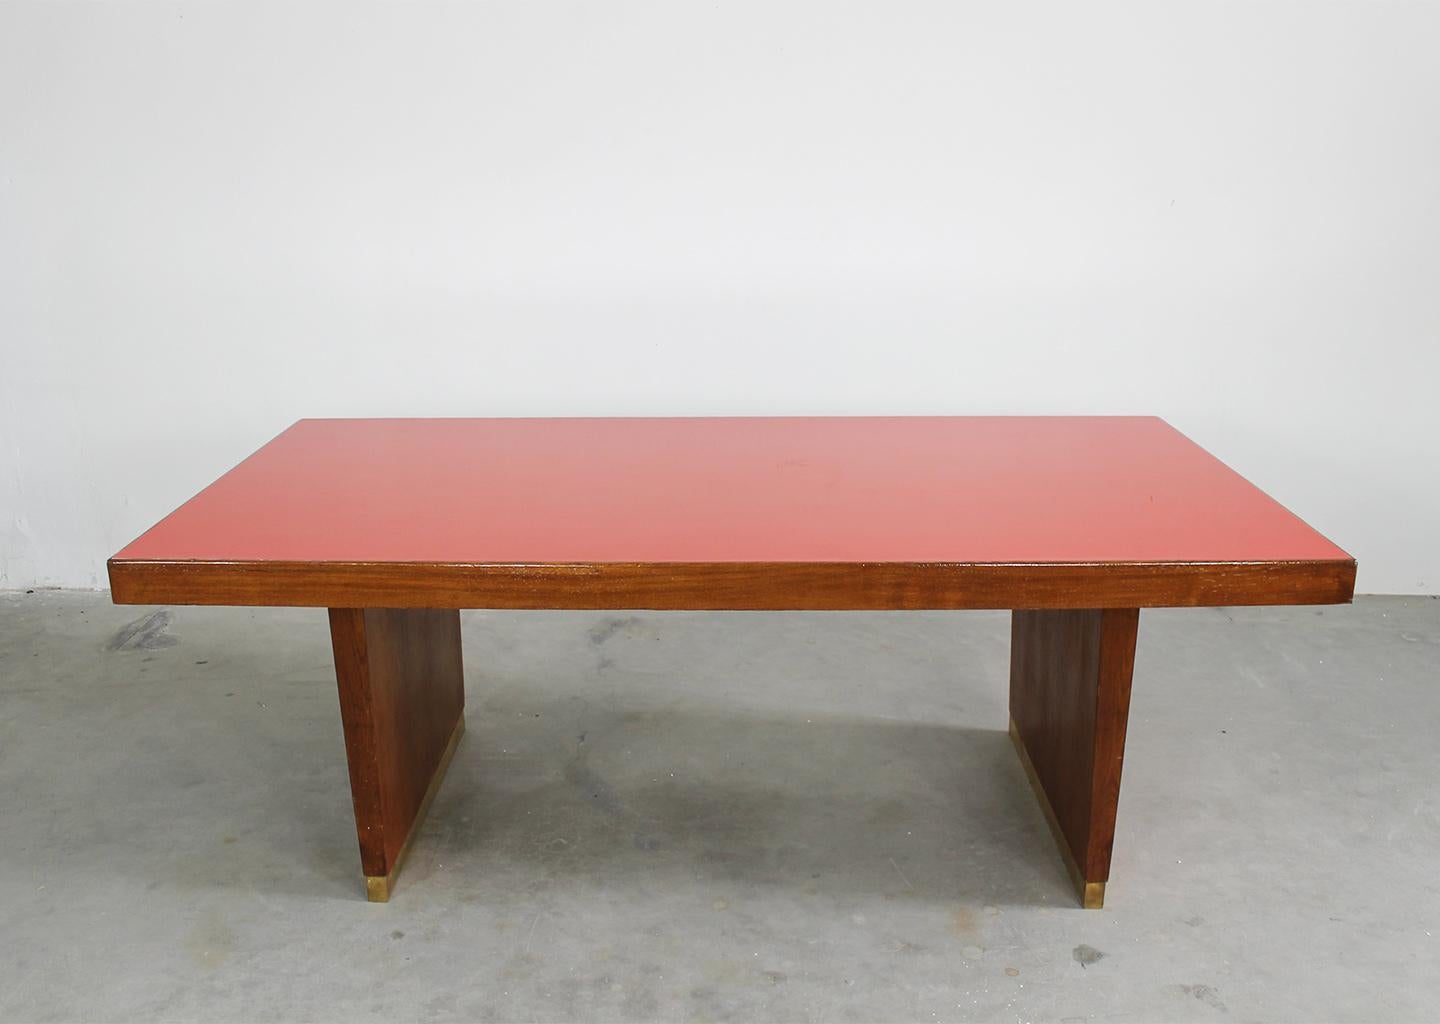 Mid-Century Modern Gio Ponti Table in Oak Brass and Red Laminate Italian Manifacture 1950s For Sale